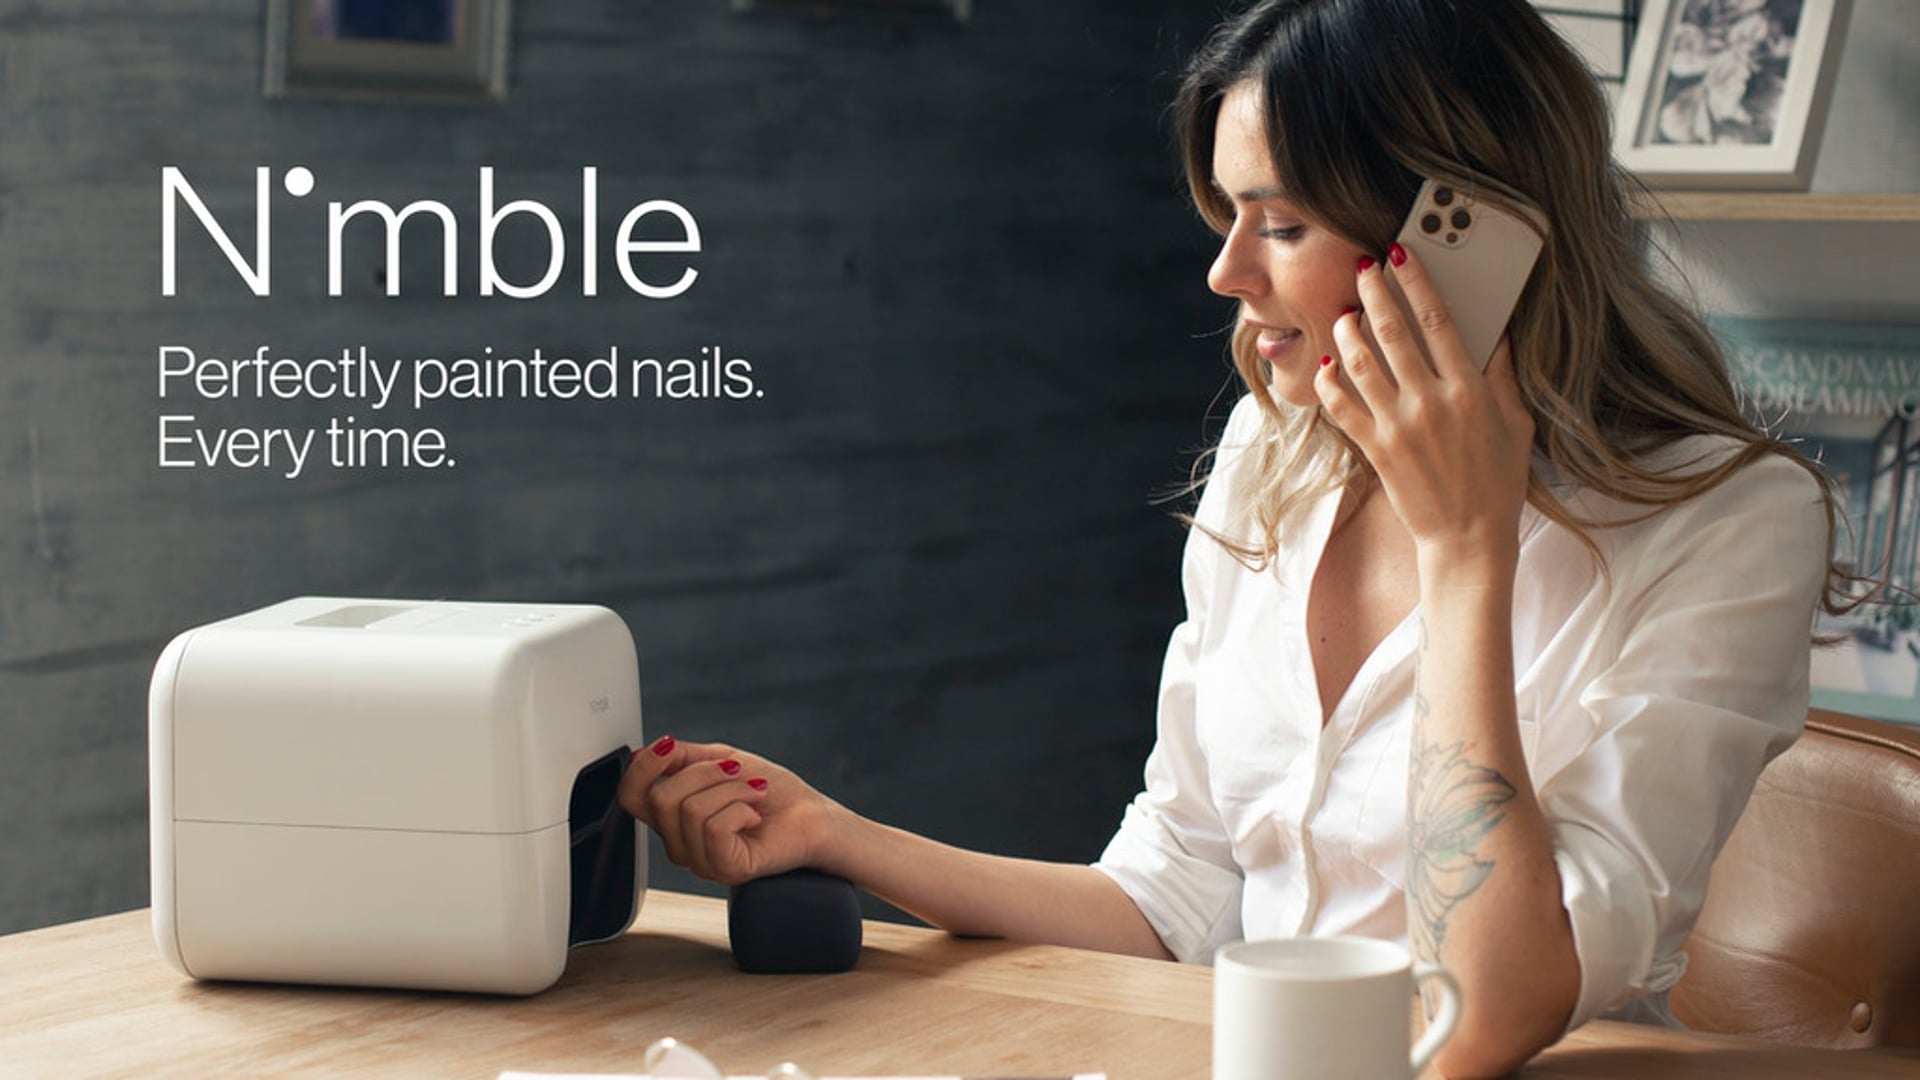 Nimble - Perfectly painted nails every time